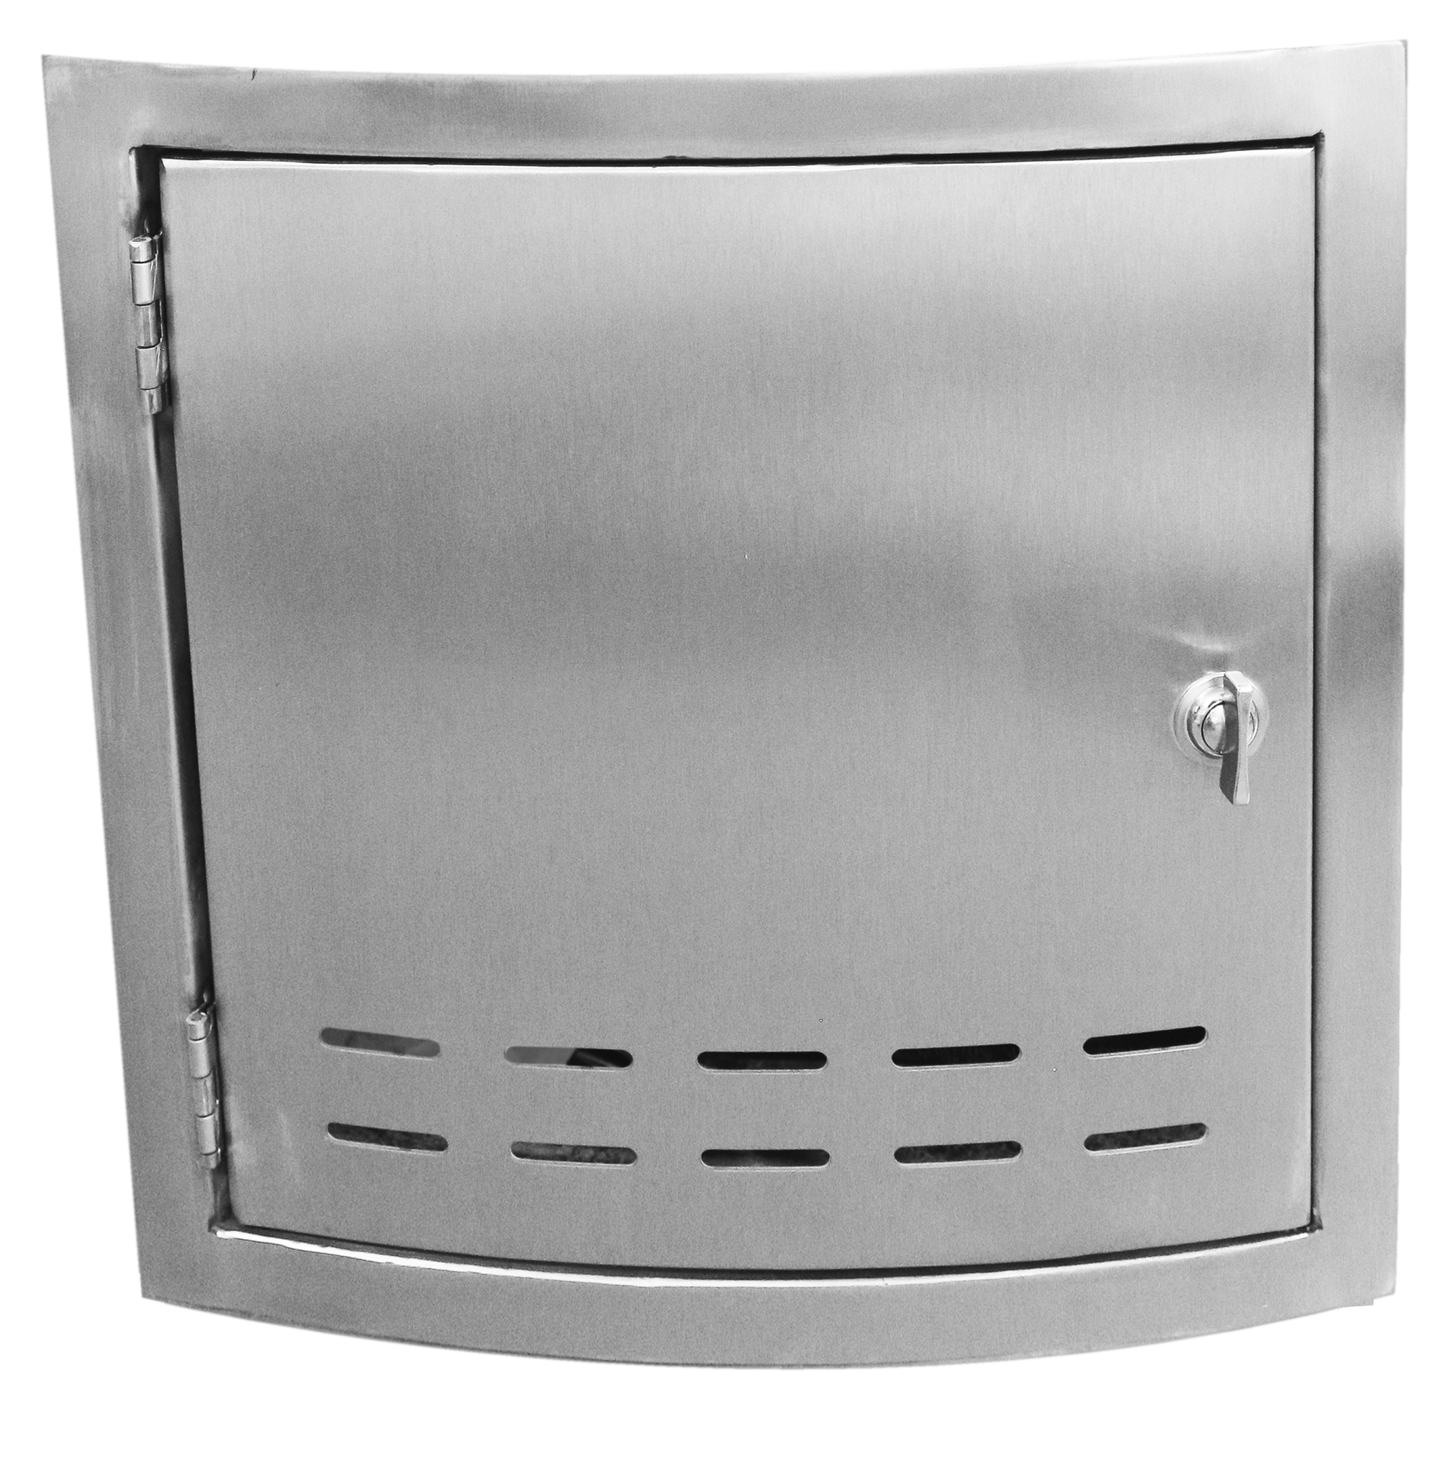 The Outdoor Plus 12" x 12" Stainless Steel Access Door for 20lb. Propane Tank